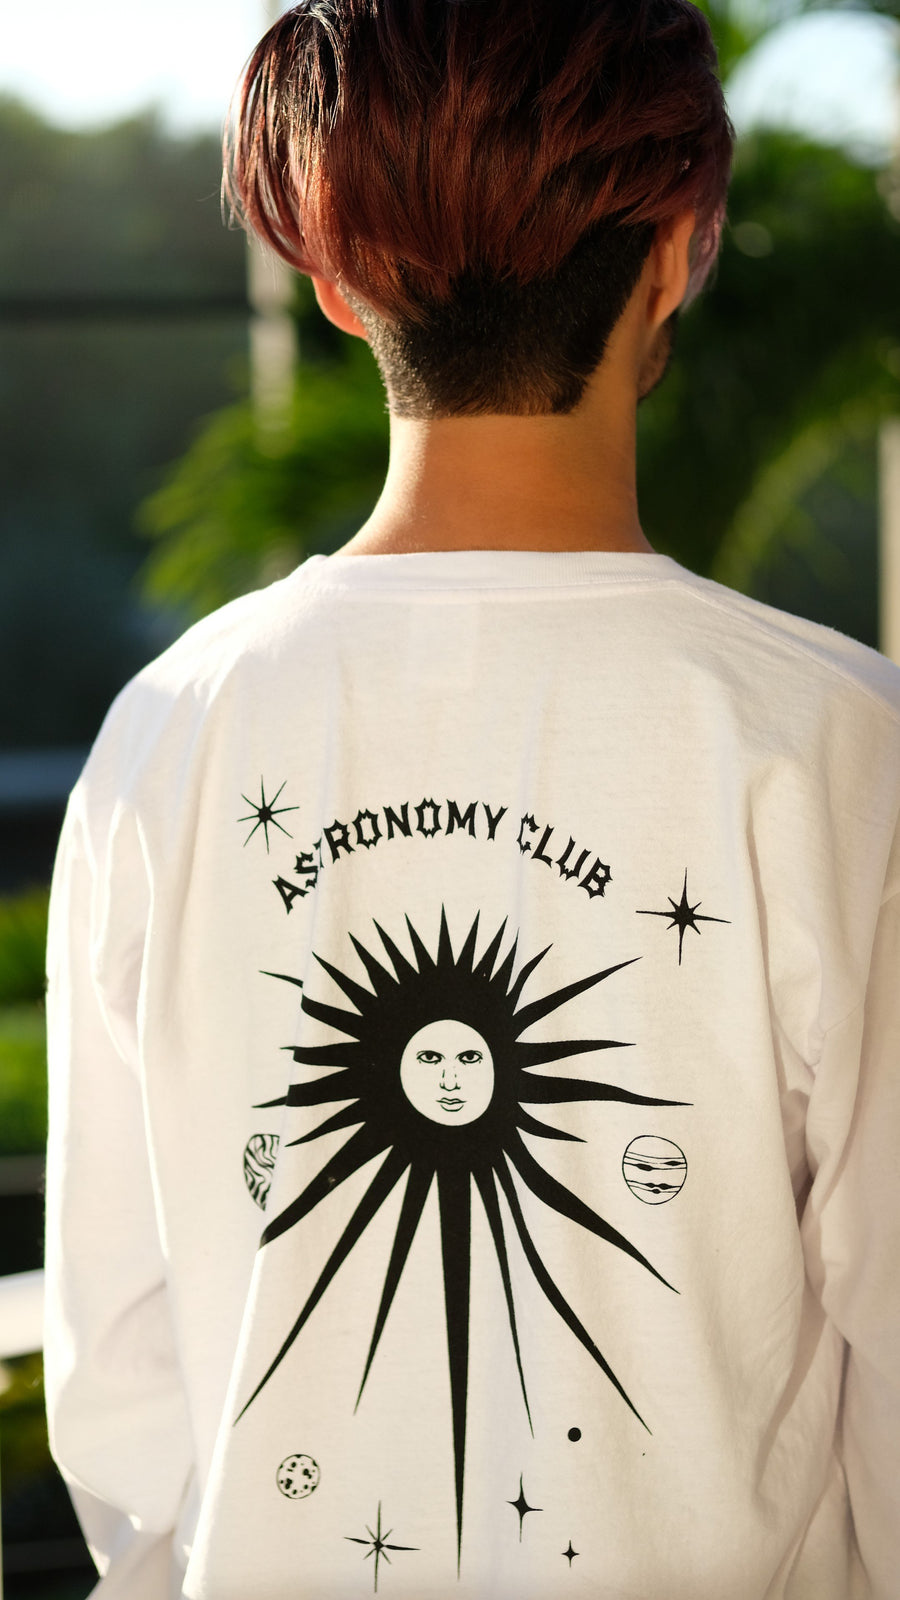 Astronomy Club Trash Tee Made by Everybody.World and designed by Anja Slibar. 